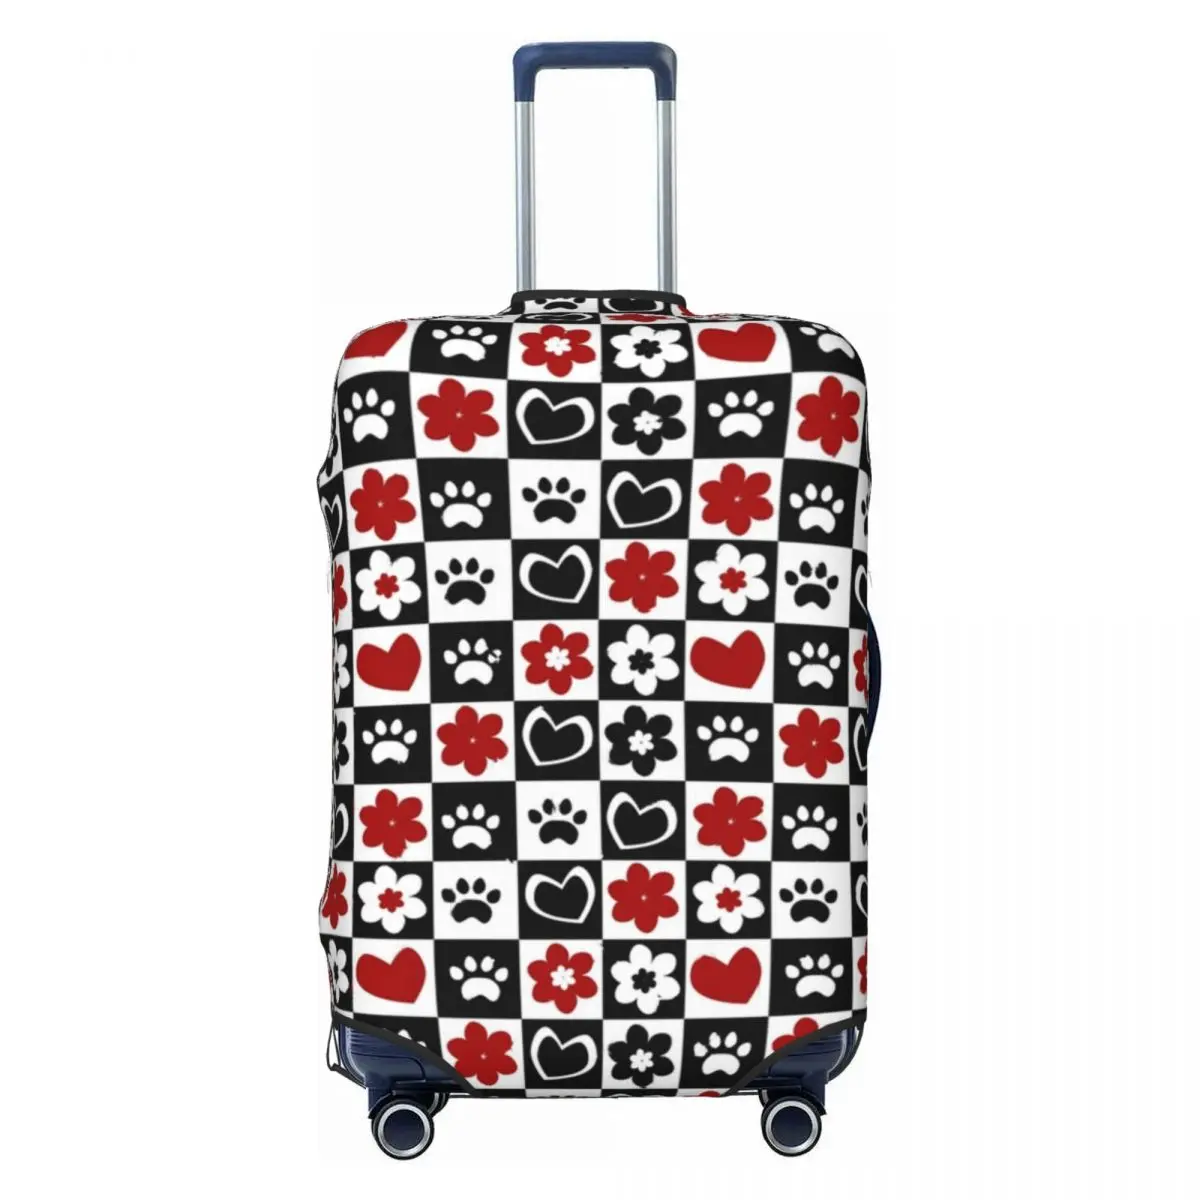 

Chessboard Pattern Suitcase Cover Flowers Hearts Cat Footprint Vacation Cruise Trip Useful Luggage Accesories Protection